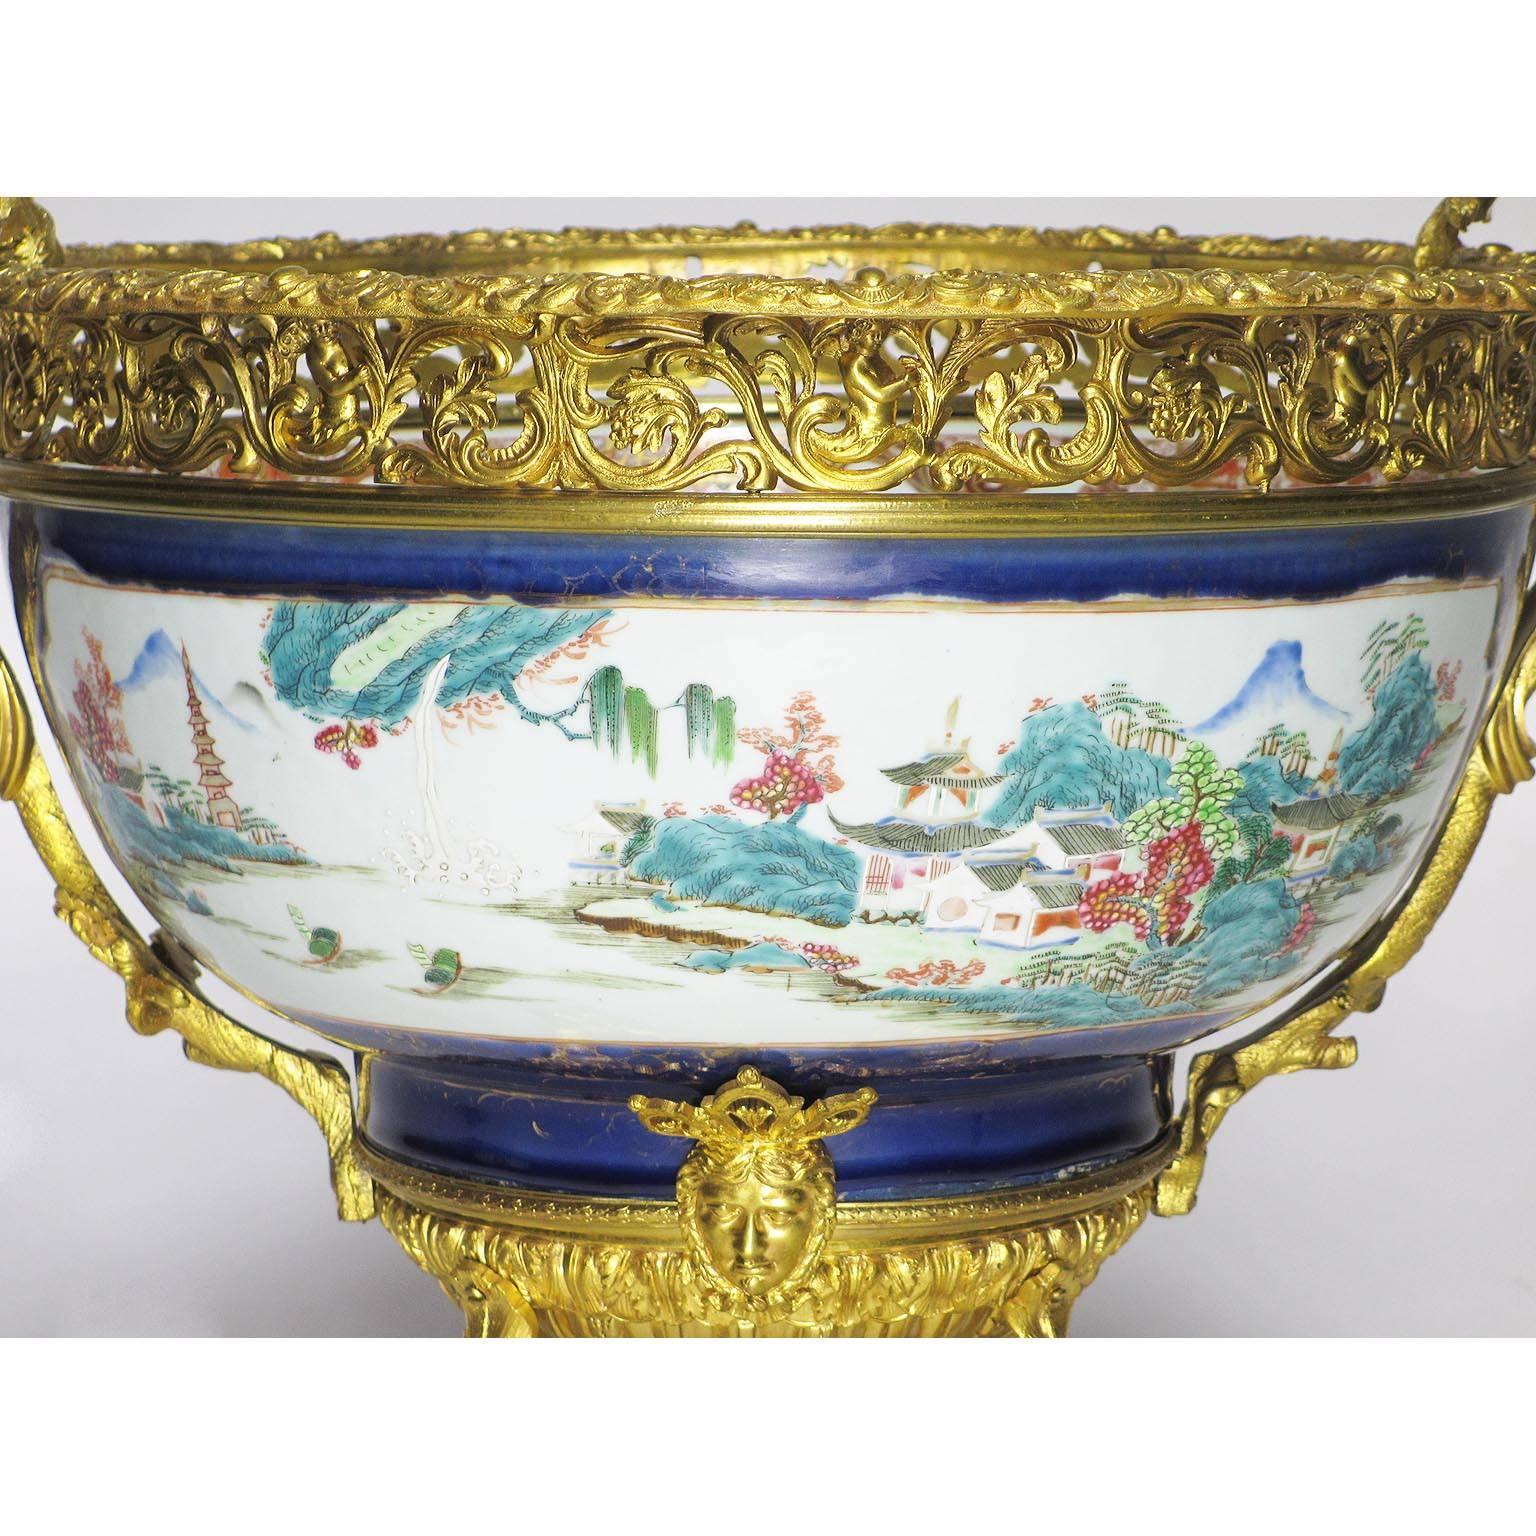 A very fine and large 19th century Chinese porcelain and French figural ormolu-mounted Chinoiserie style centerpiece. The circular ovoid bowl, maybe 18th century Jiaqing period (unverified), decorated with pagodas and landscape scenes, flanking